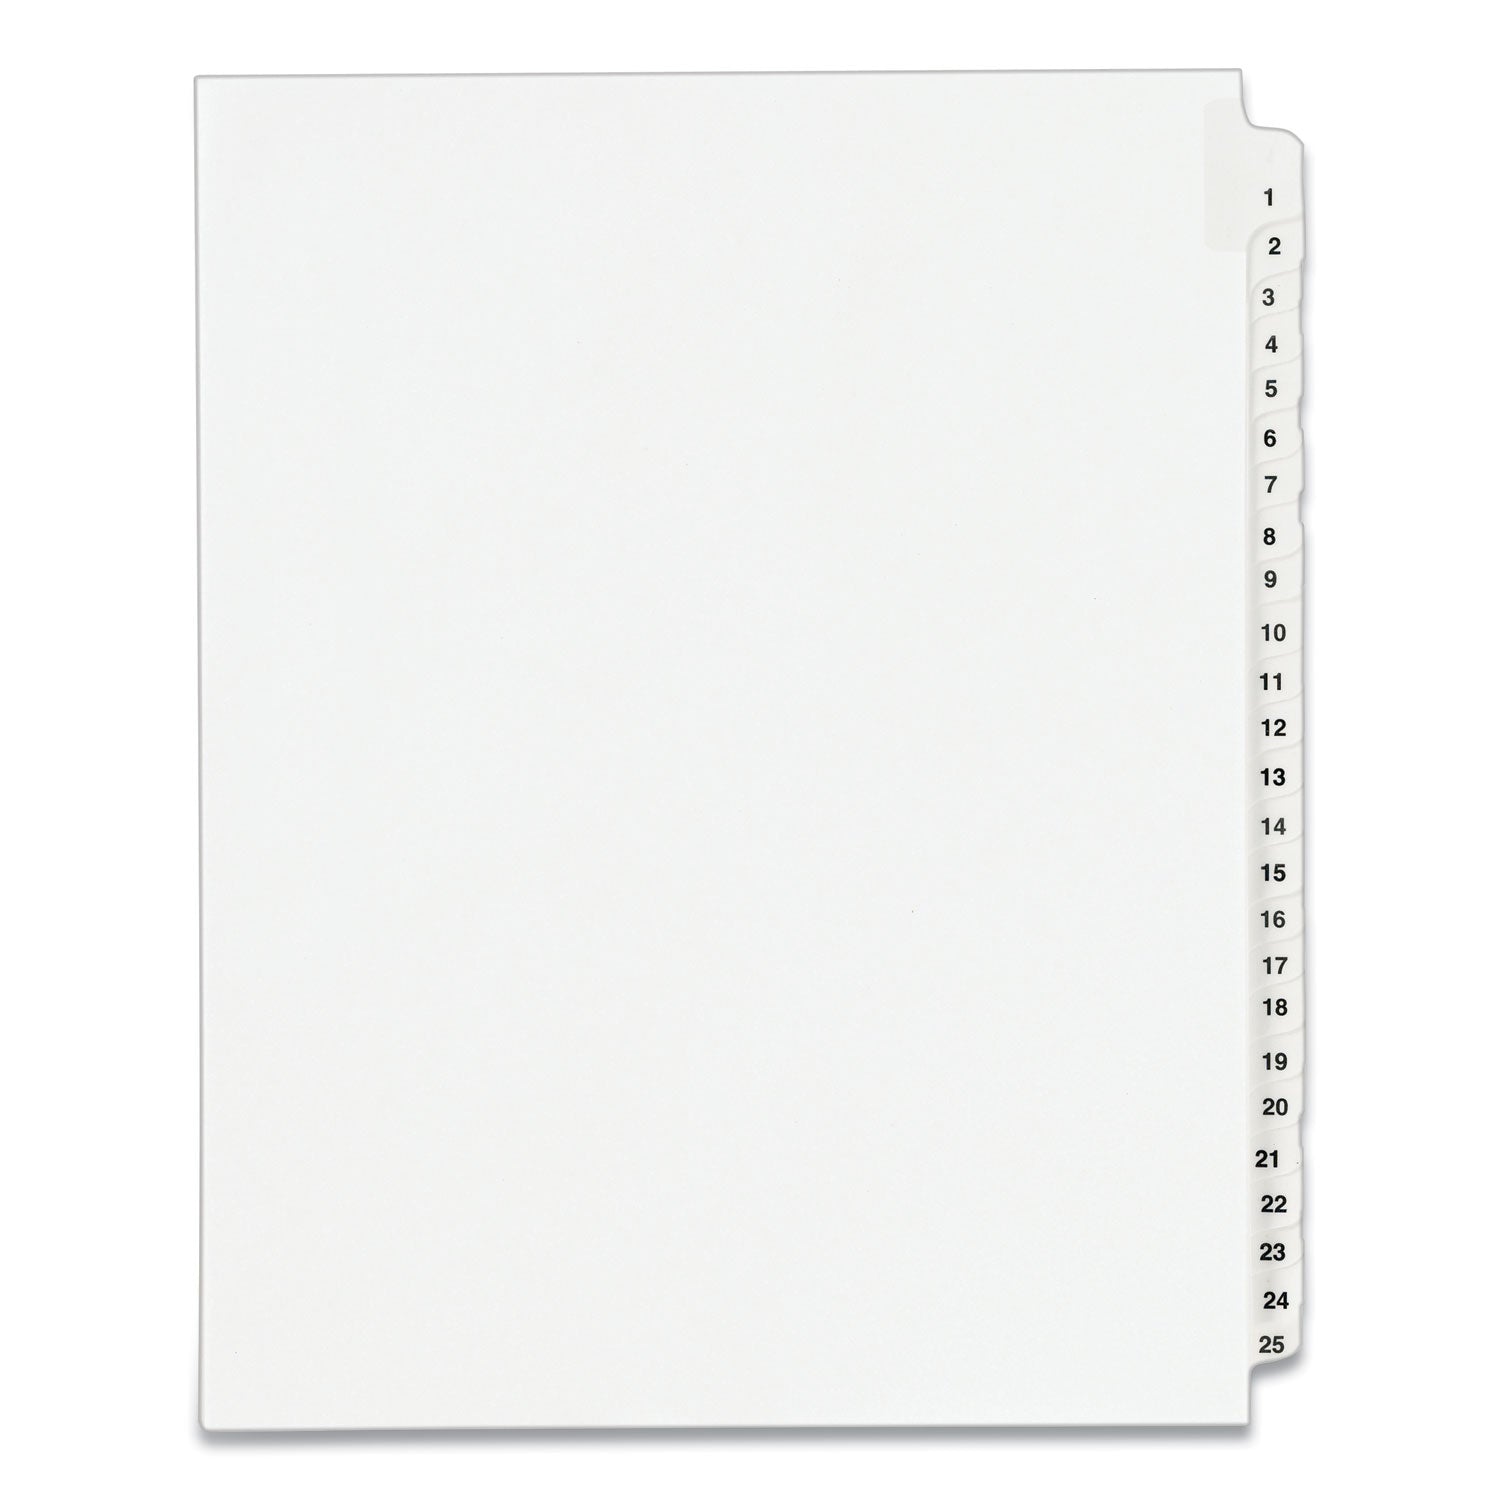 Preprinted Legal Exhibit Side Tab Index Dividers, Avery Style, 25-Tab, 1 to 25, 11 x 8.5, White, 1 Set, (1330) - 